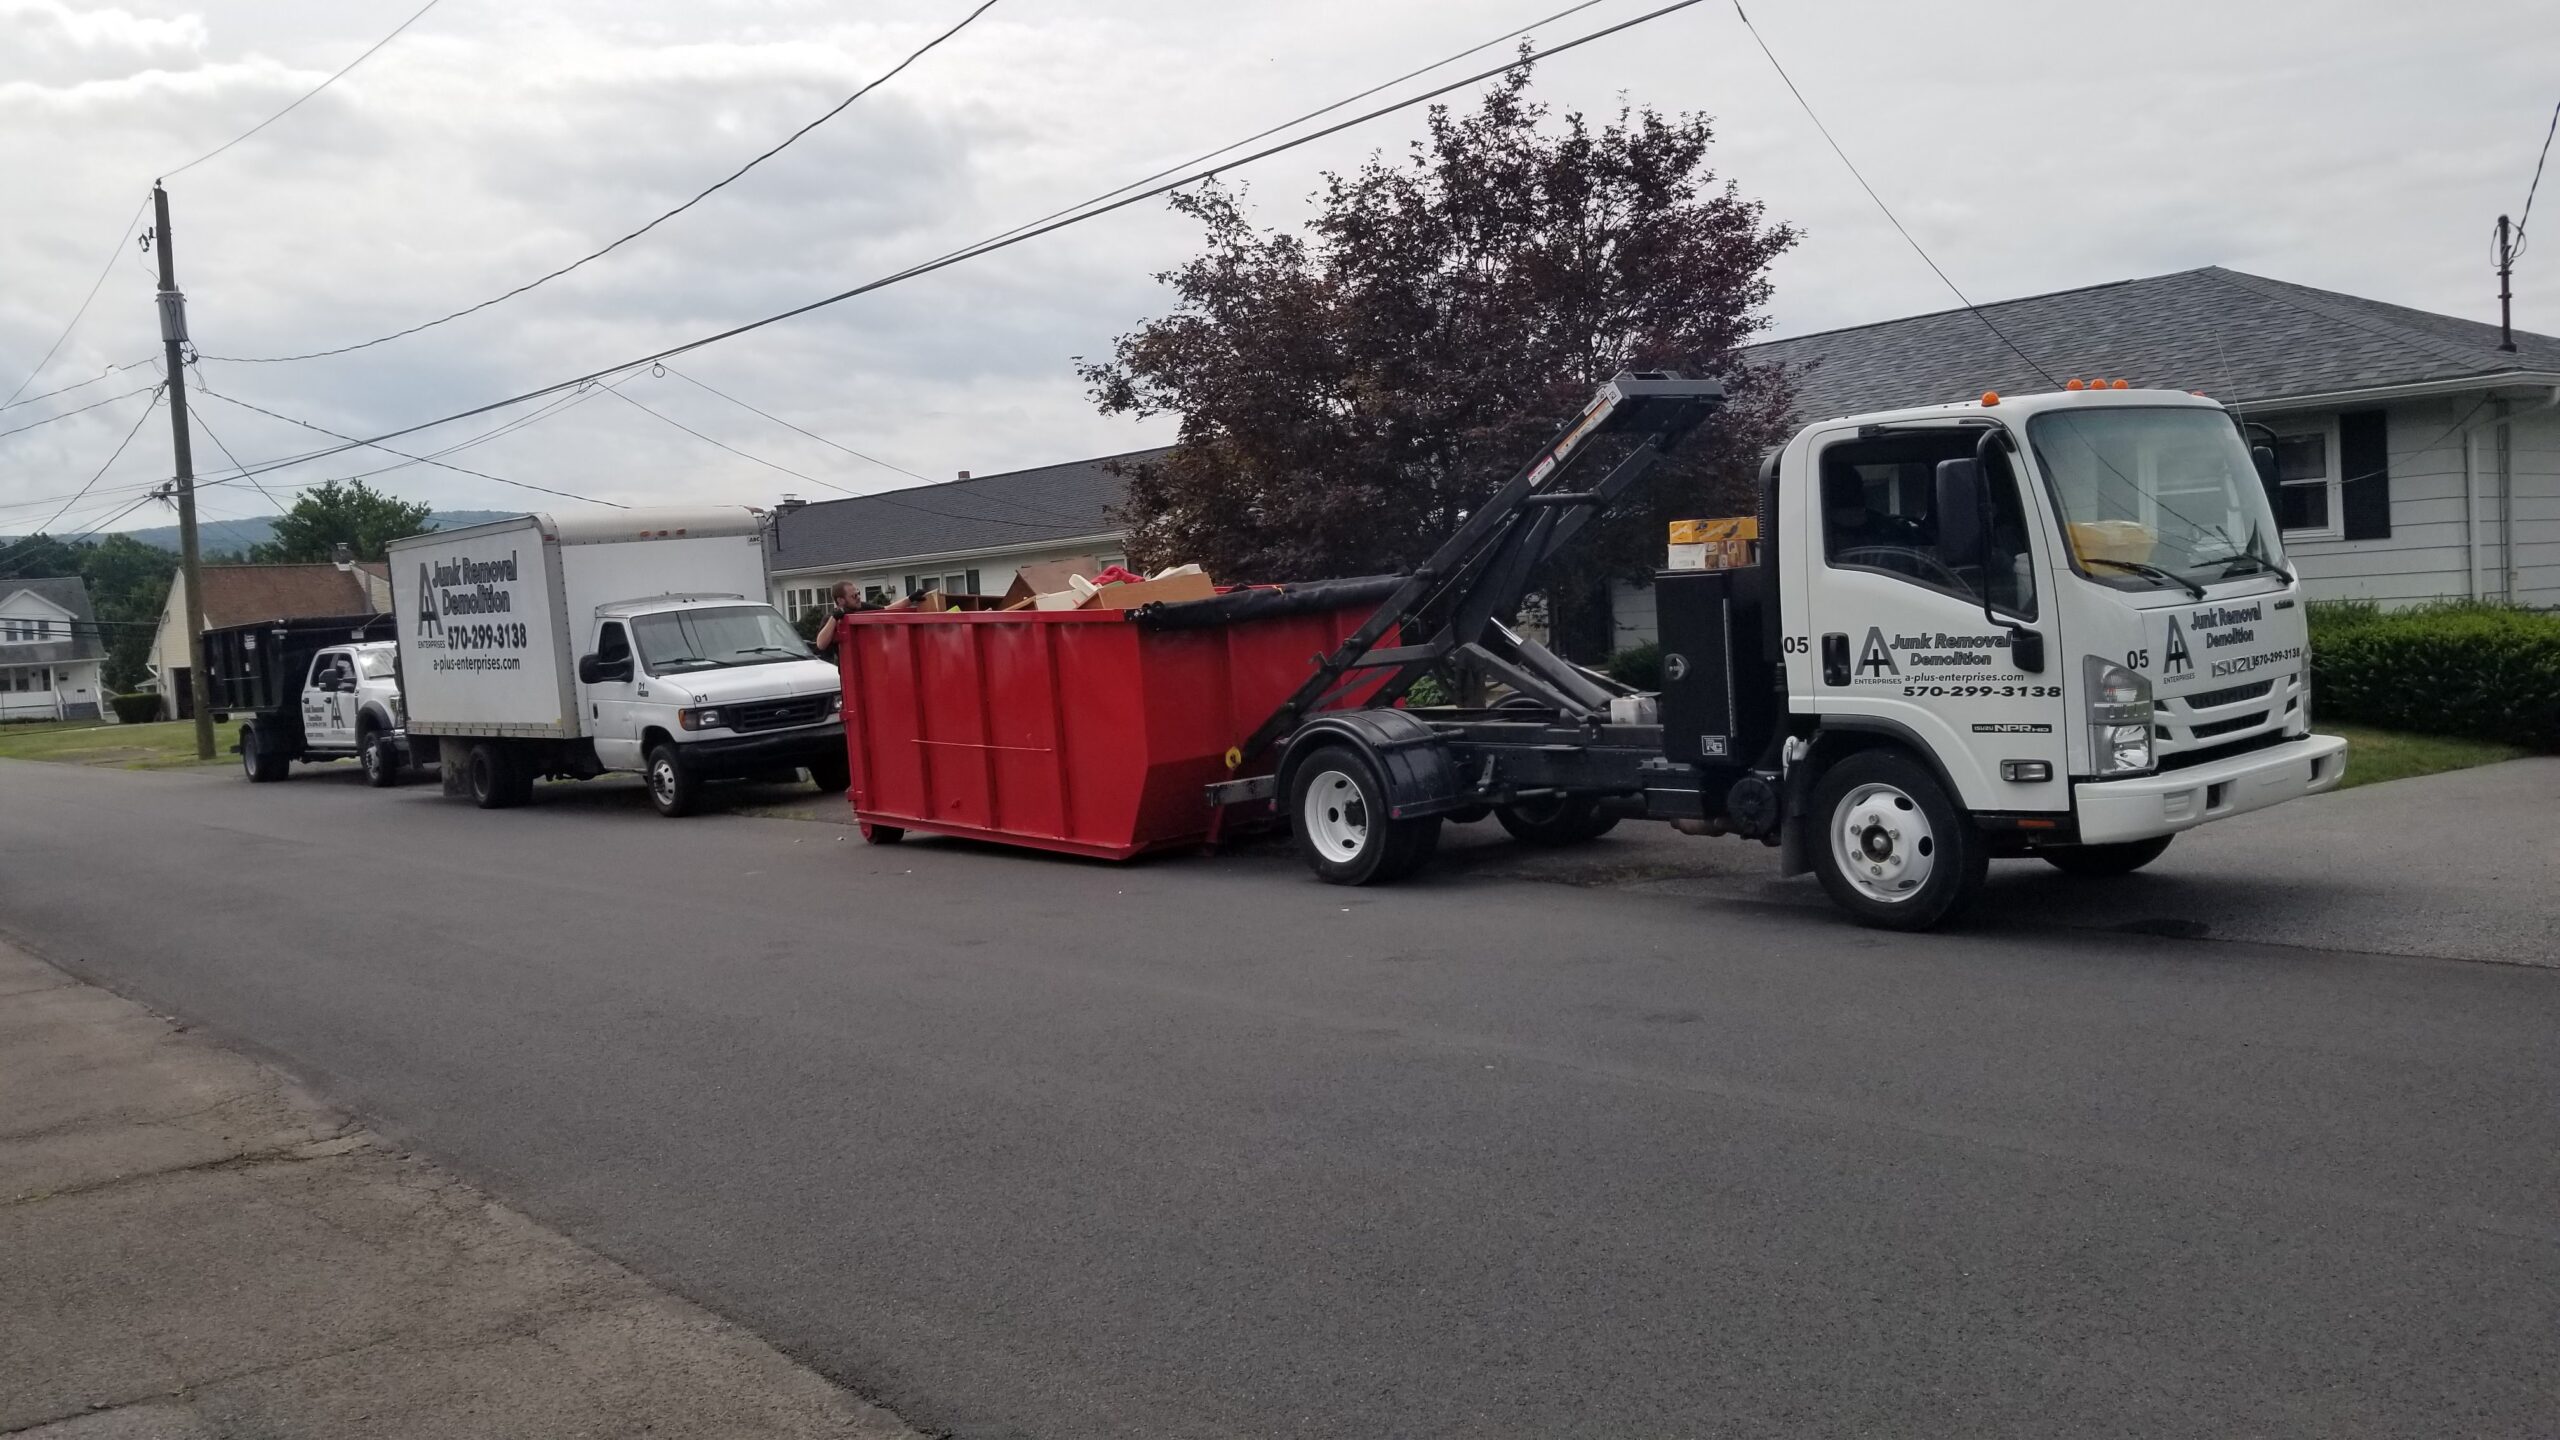 junk_removal_near_me_Wilkes_barre_pa - Junk Removal ...